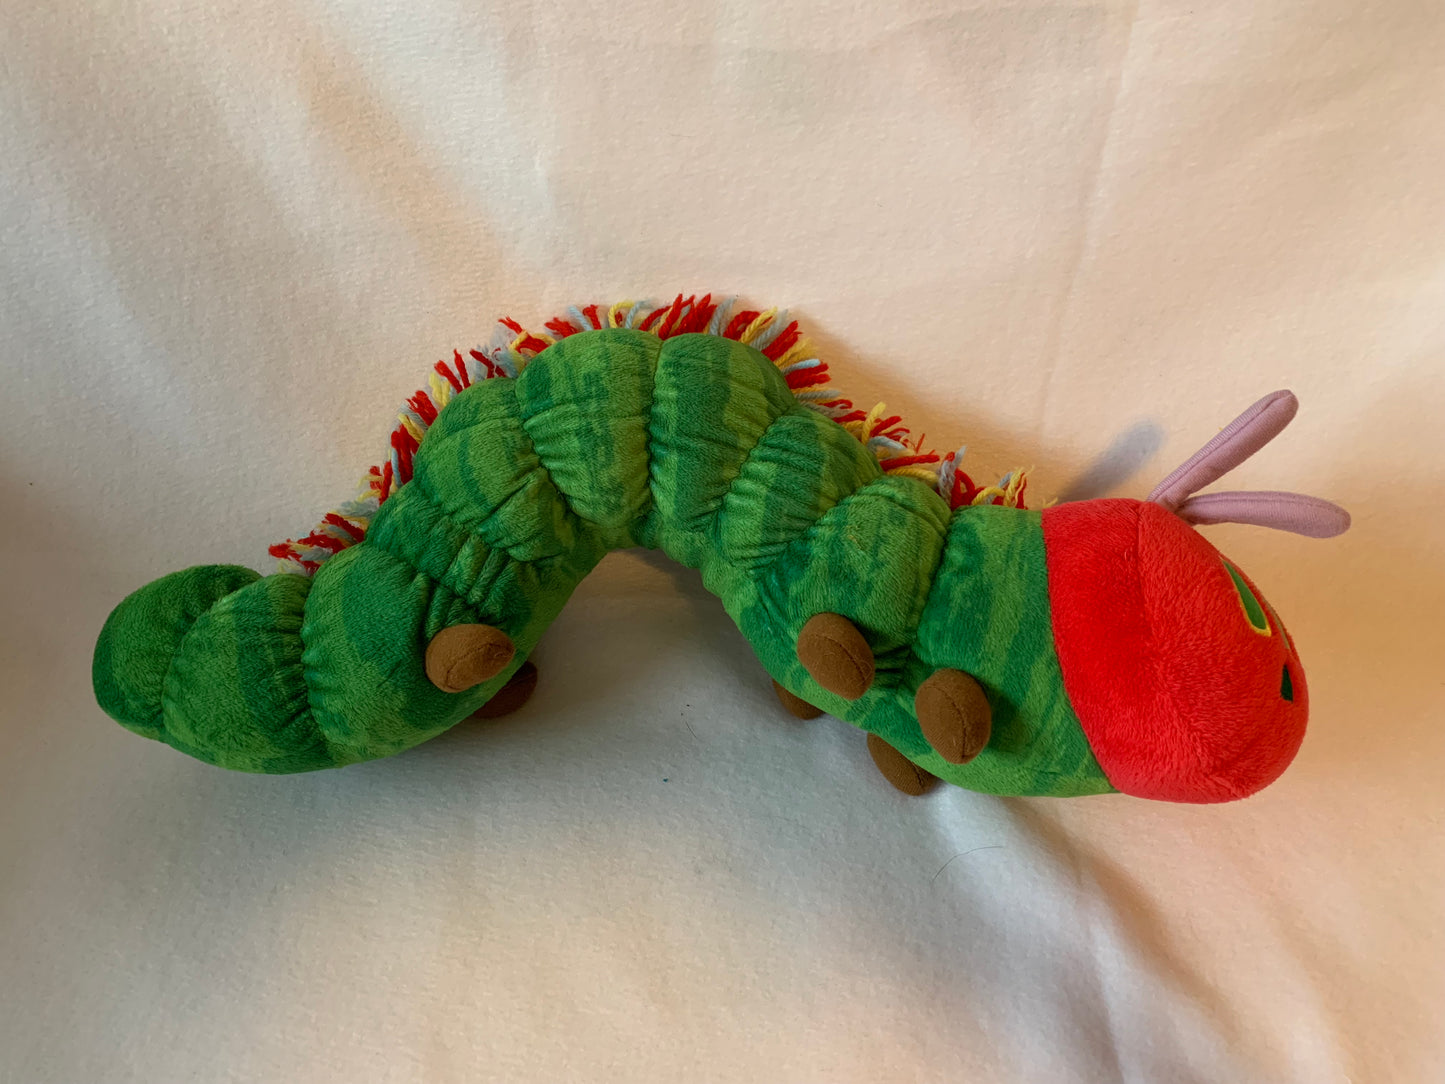 Weighted stuffed animal - weighted caterpillar with 3 lbs, washable plush buddy